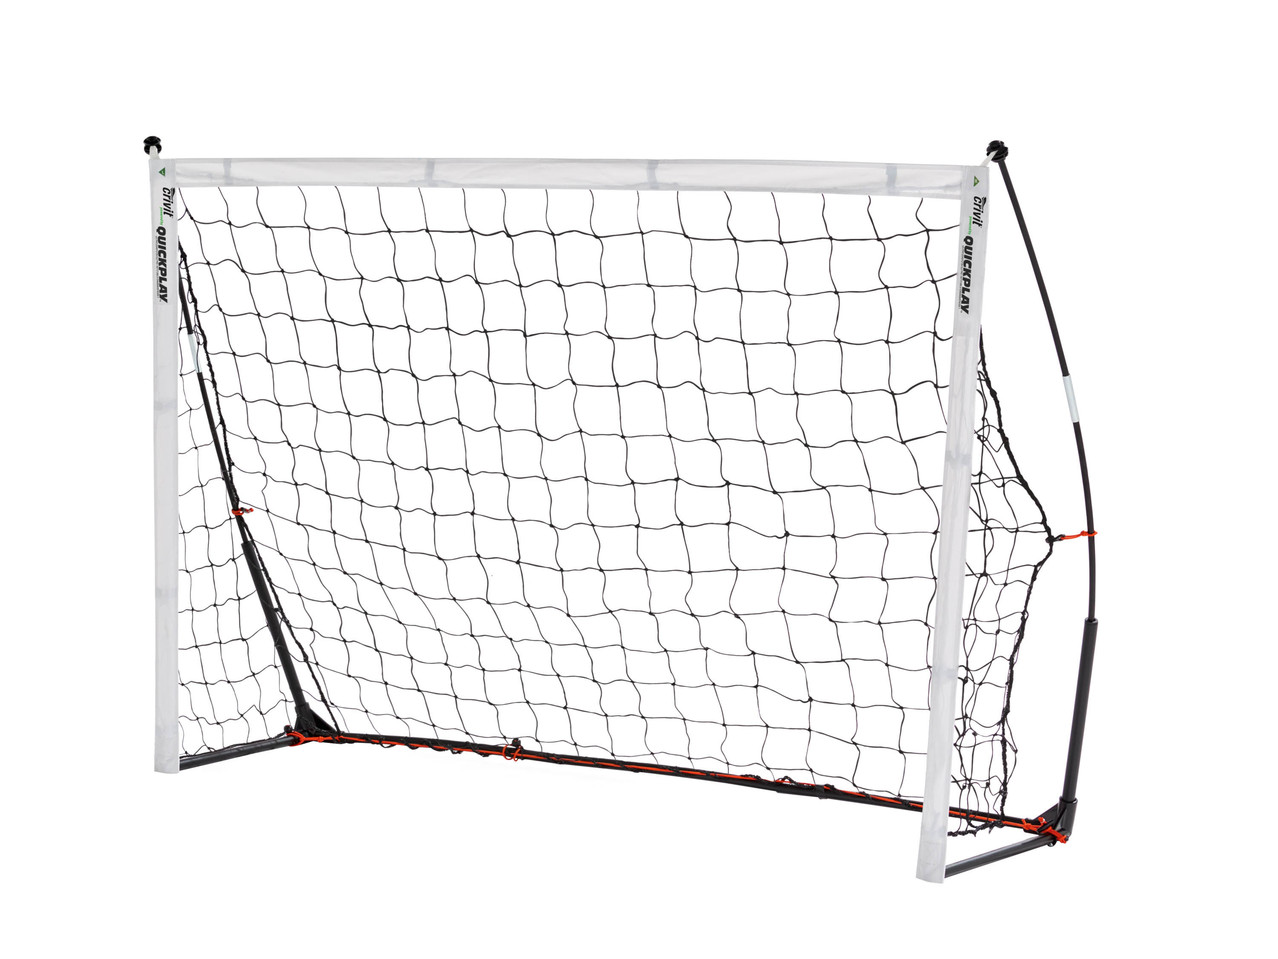 CRIVIT 2-in-1: Portable Pop-Up Goal with Rebound Net